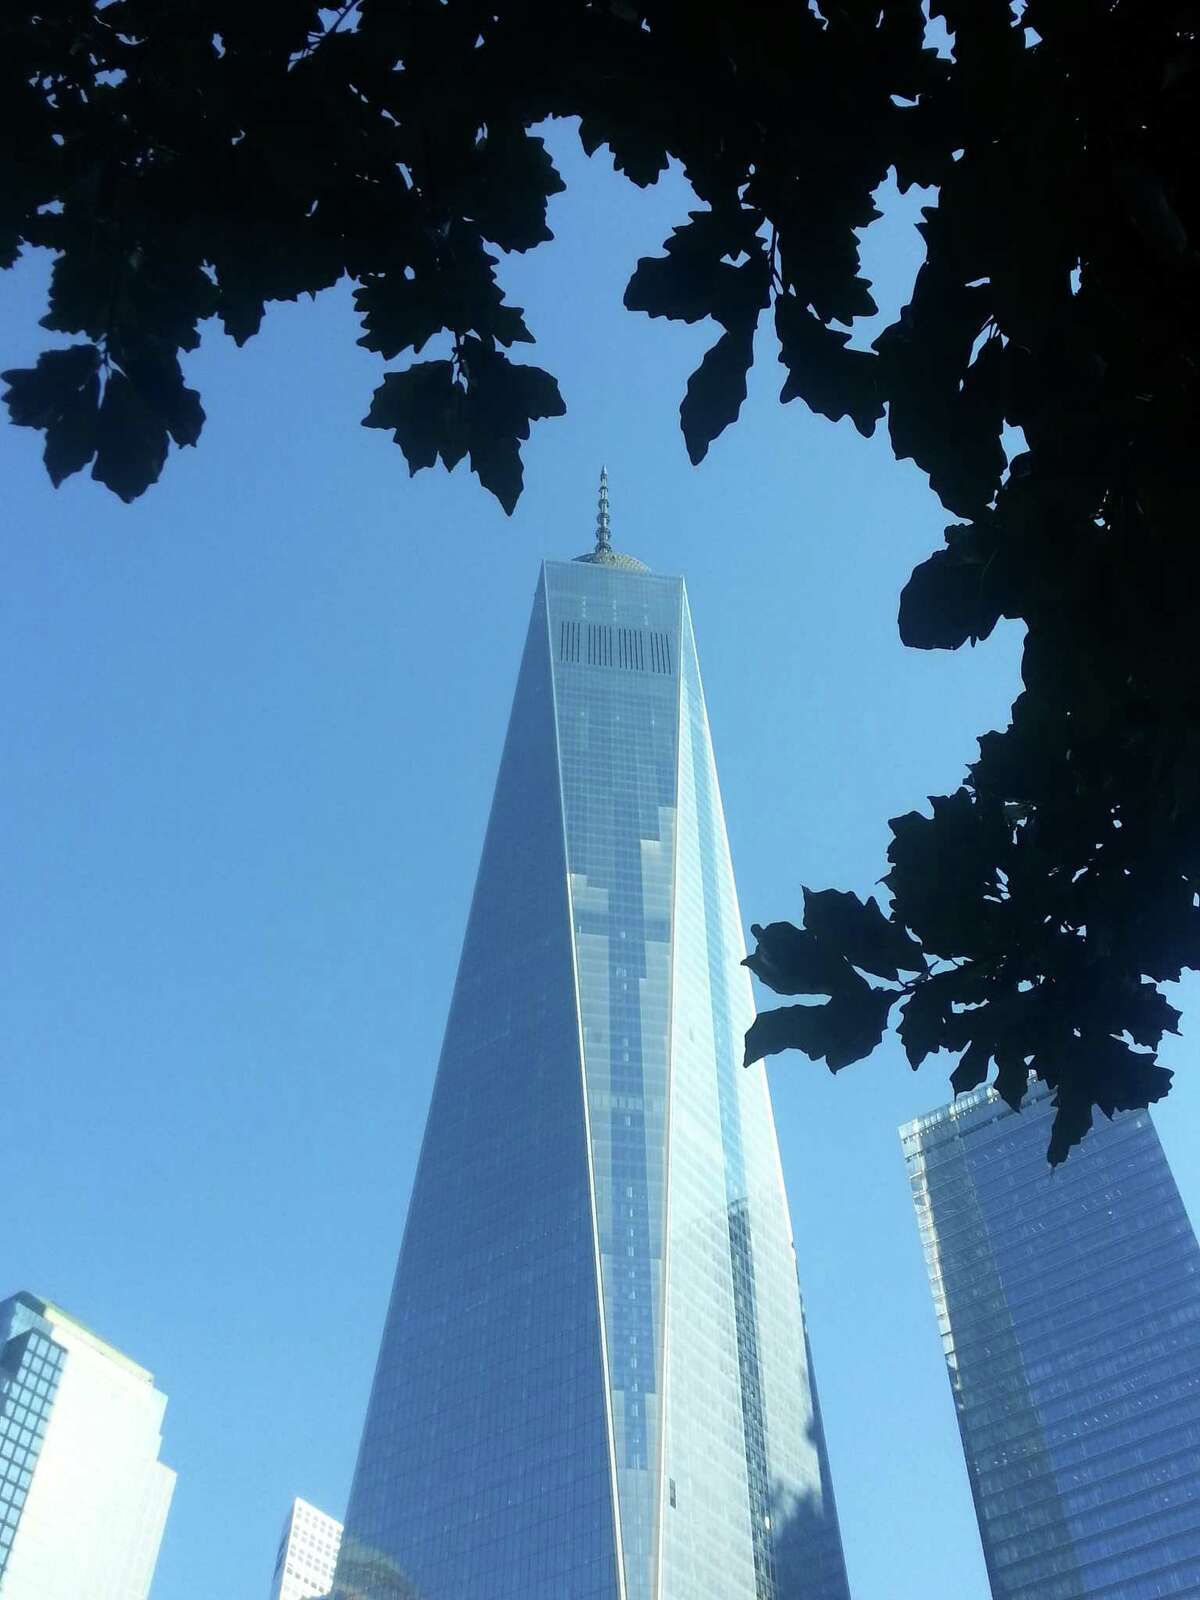 Chronicle reader Donna Schnitker of Friendswood took this vacation photo near One World Trade Center in New York City, N.Y.